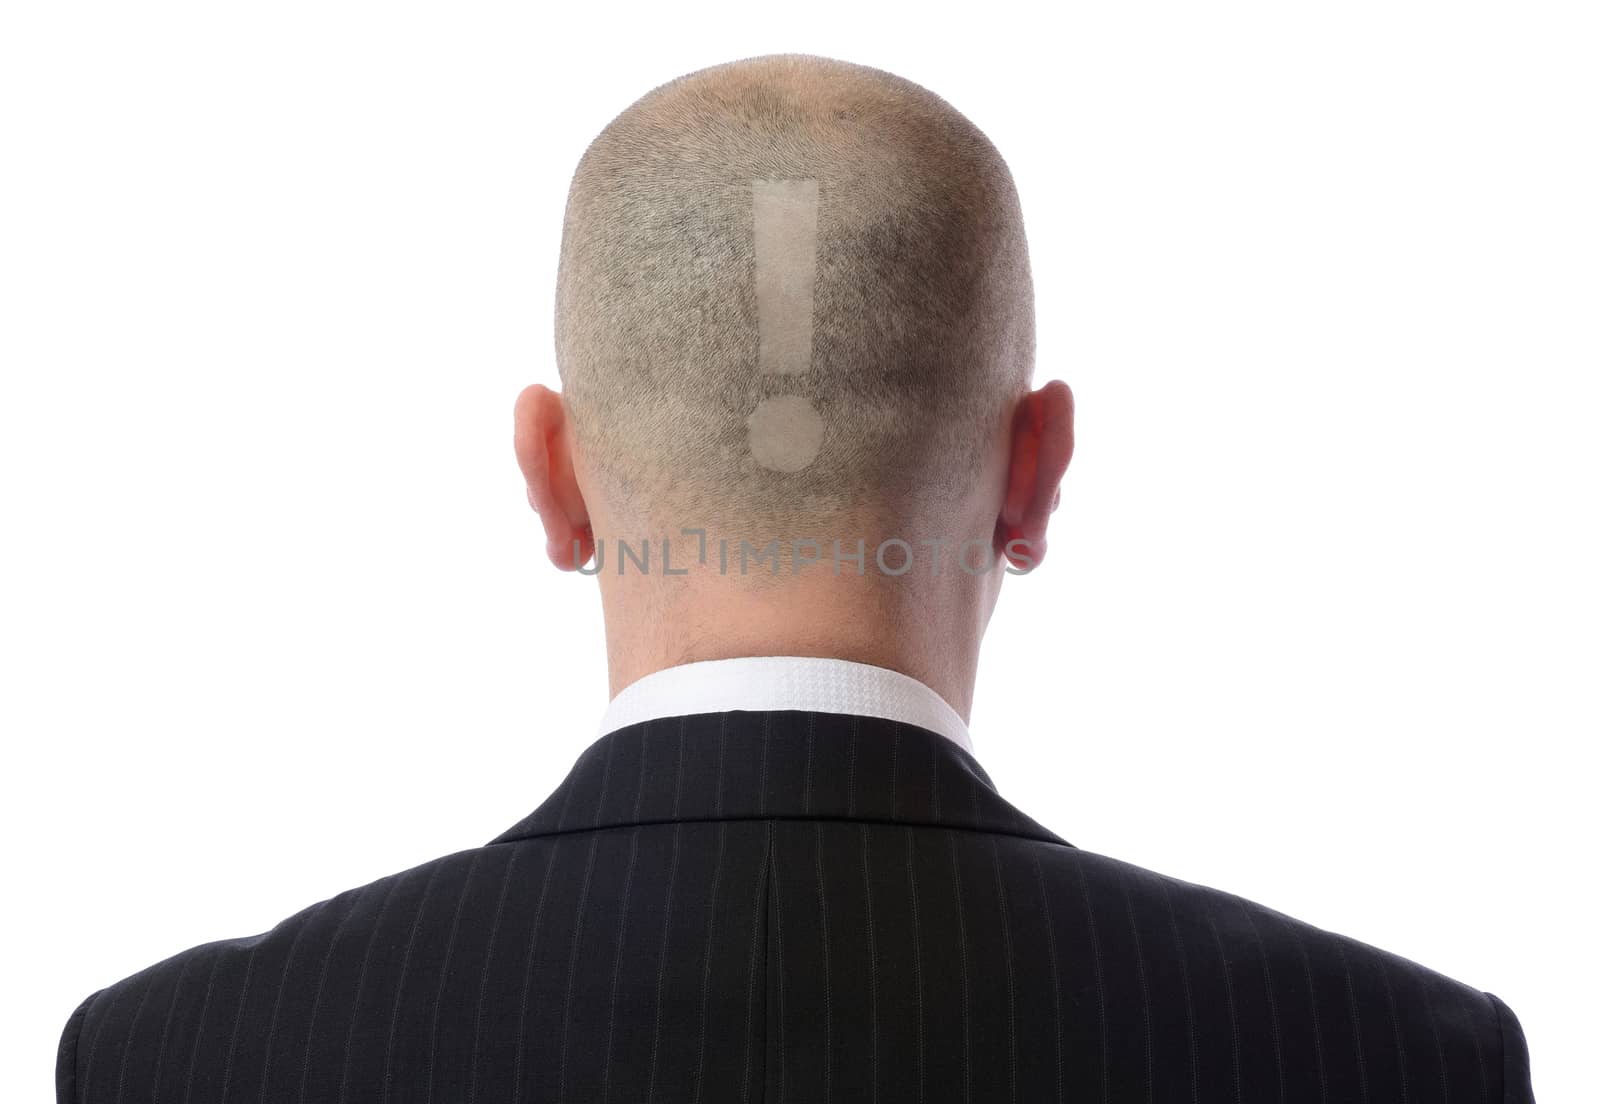 Rear view of bald man wearing suit over white background 